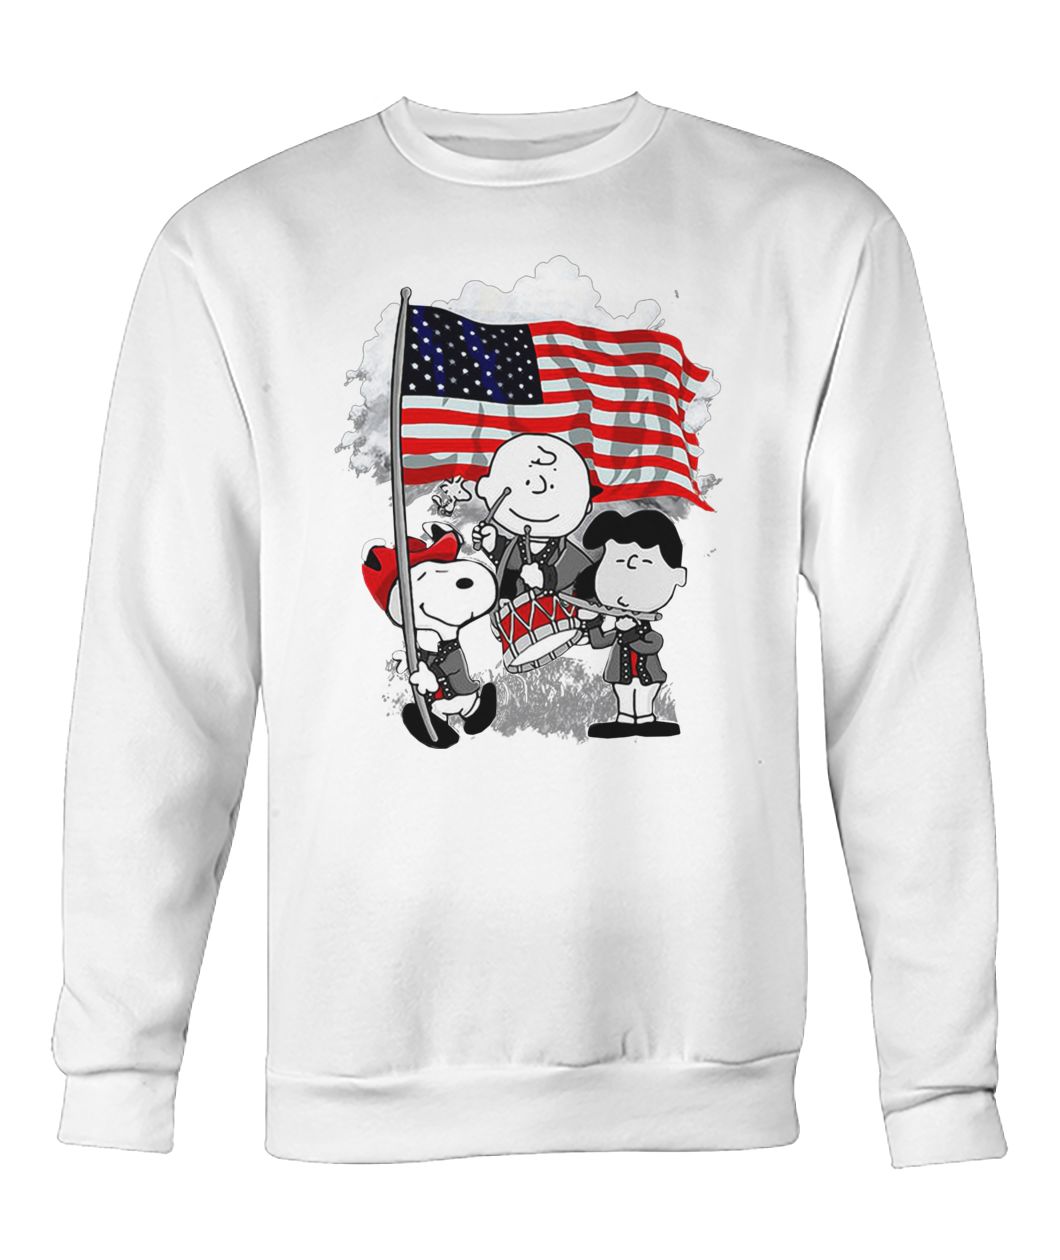 Snoopy charlie brown and lucy with american flag crew neck sweatshirt